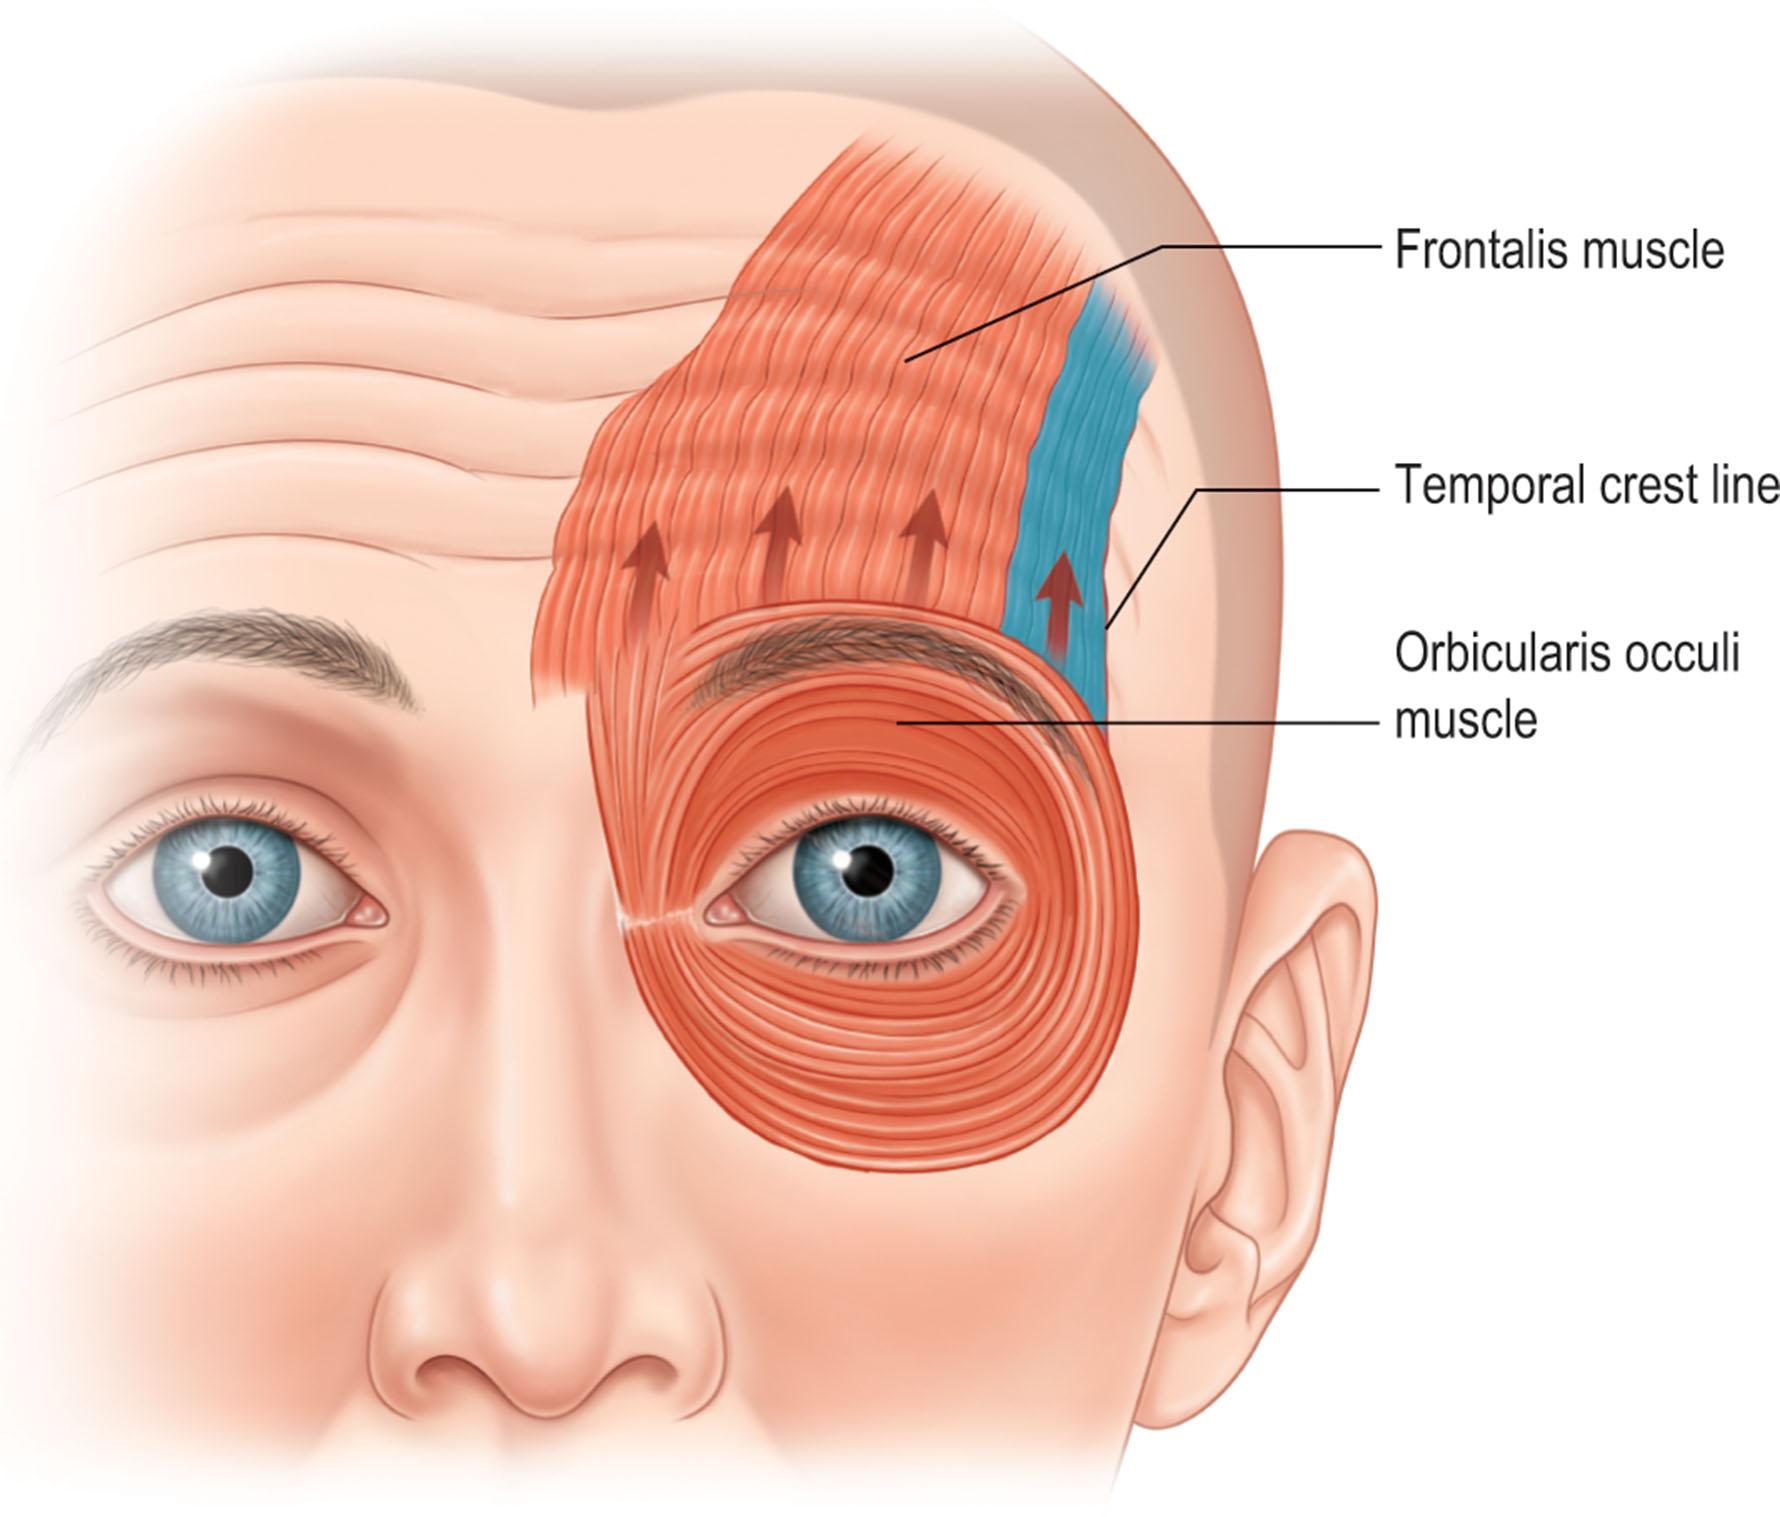 Figure 11.9, Frontalis acts to raise the eyebrow complex. On contraction, most movement occurs in the lower third of the muscle, and action is strongest on the medial and central eyebrow.